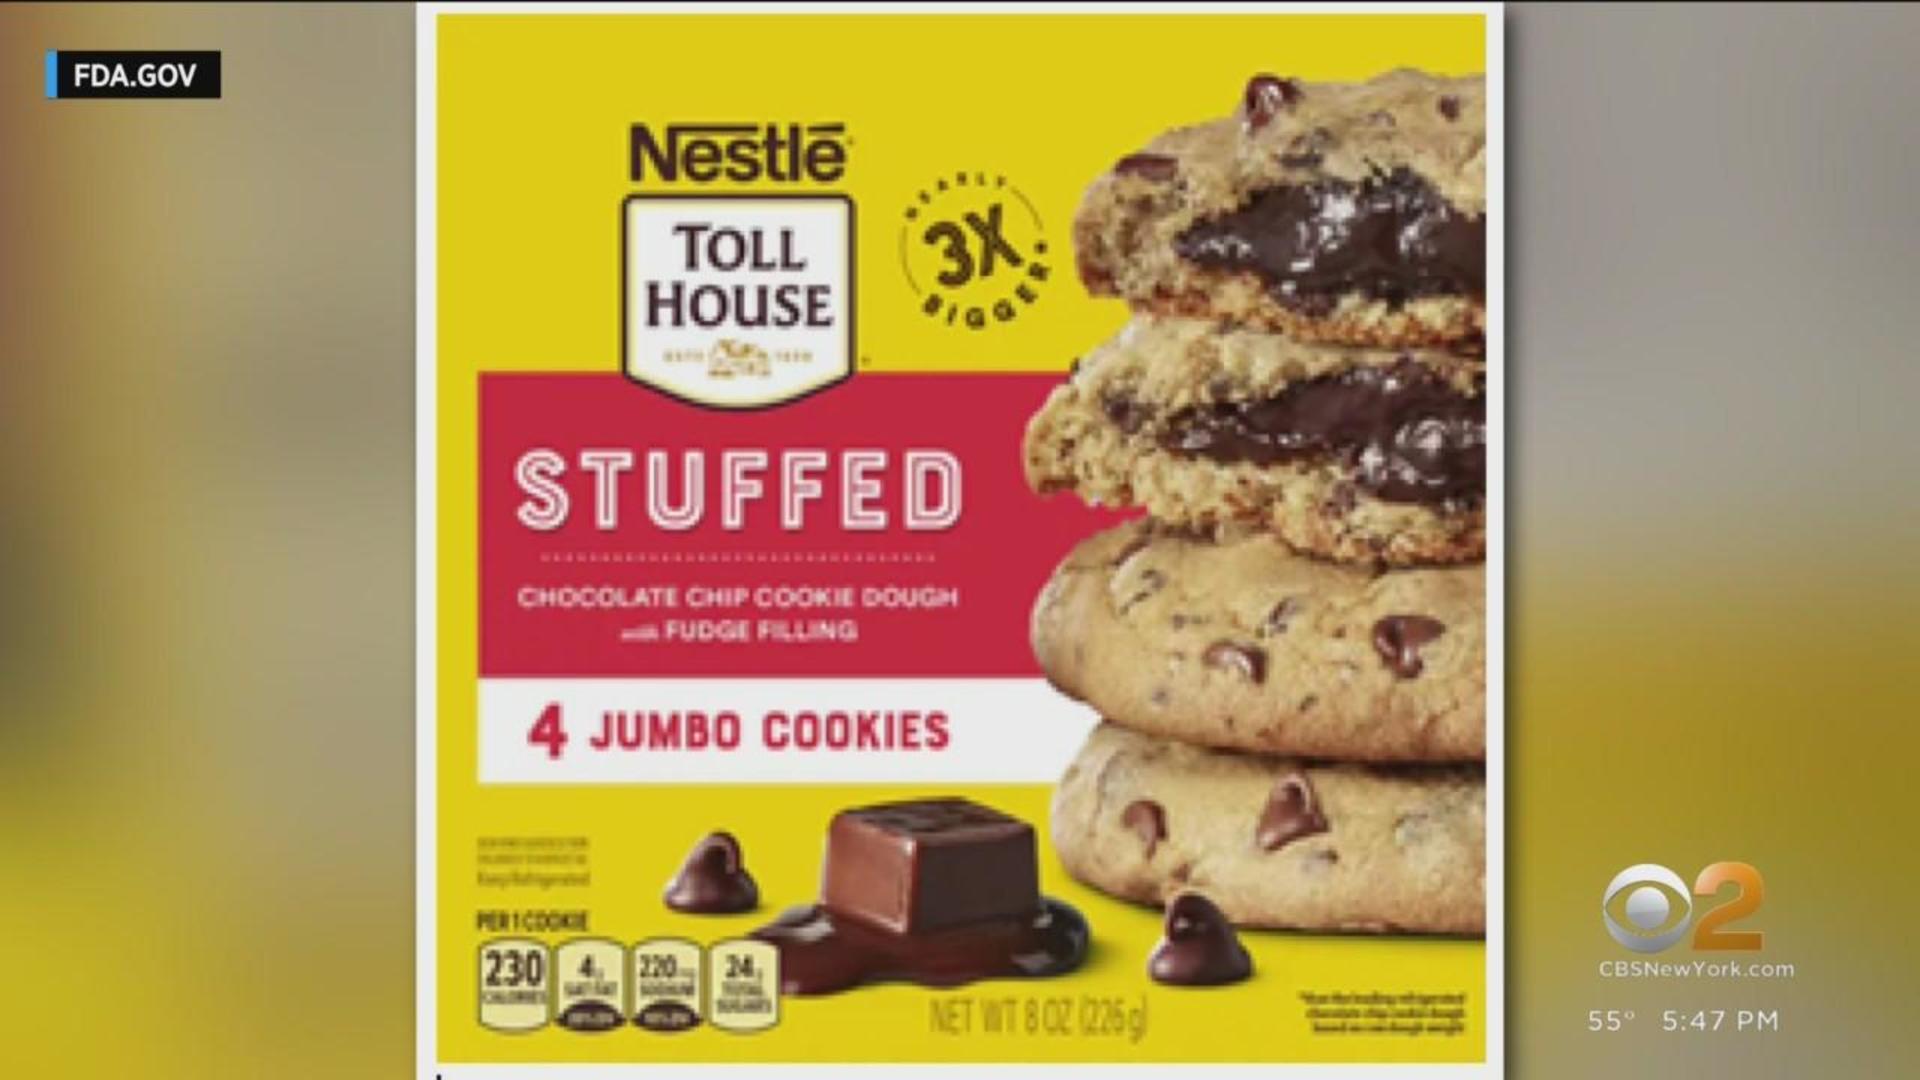 Nestlé Toll House launches cookie shot kits